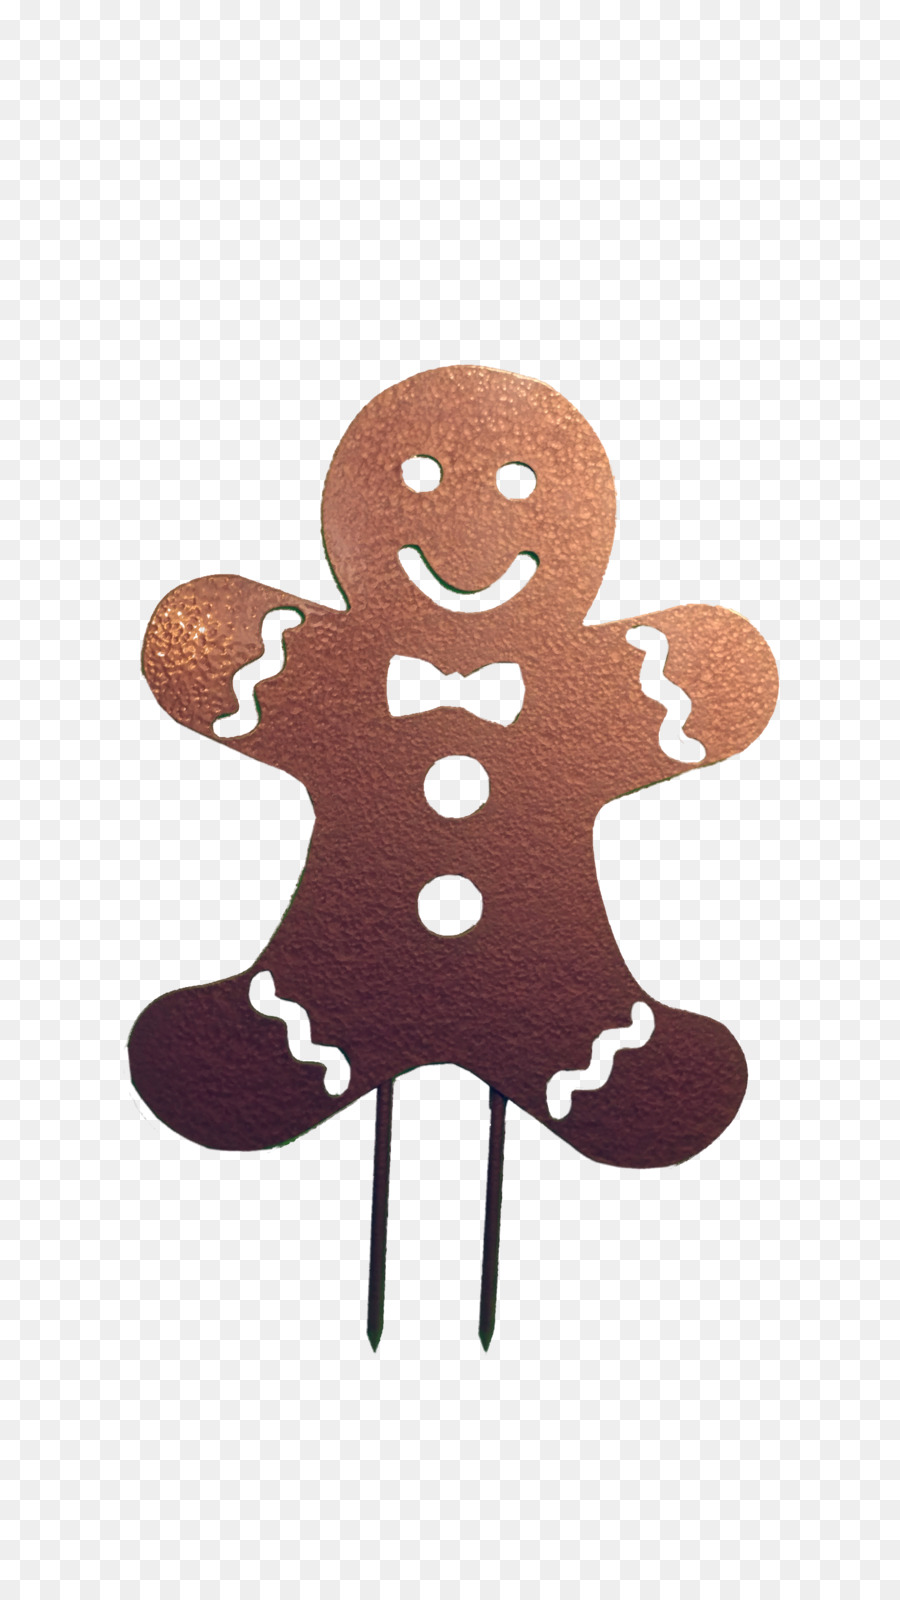 Gingerbread man Biscuits Scalable Vector Graphics - vintage gingerbread man book png download - 2620*4656 - Free Transparent Gingerbread Man png Download.